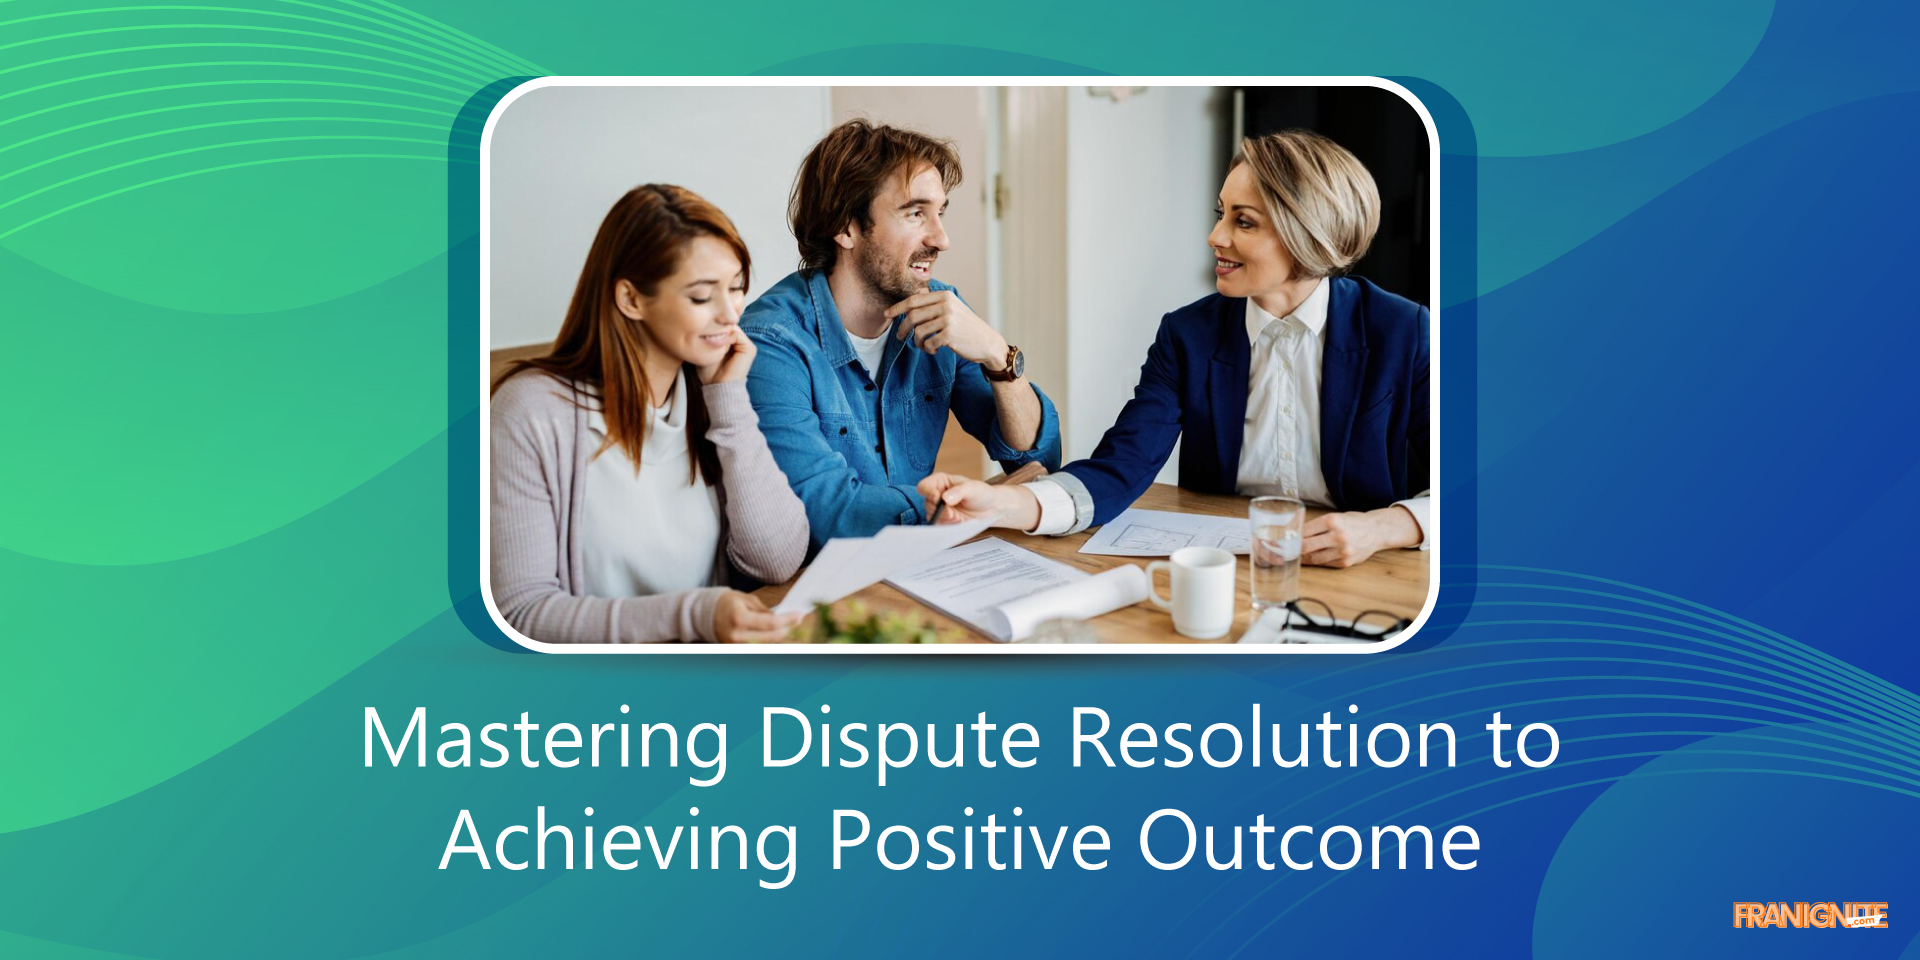 Mastering Dispute Resolution to Achieving Positive Outcome